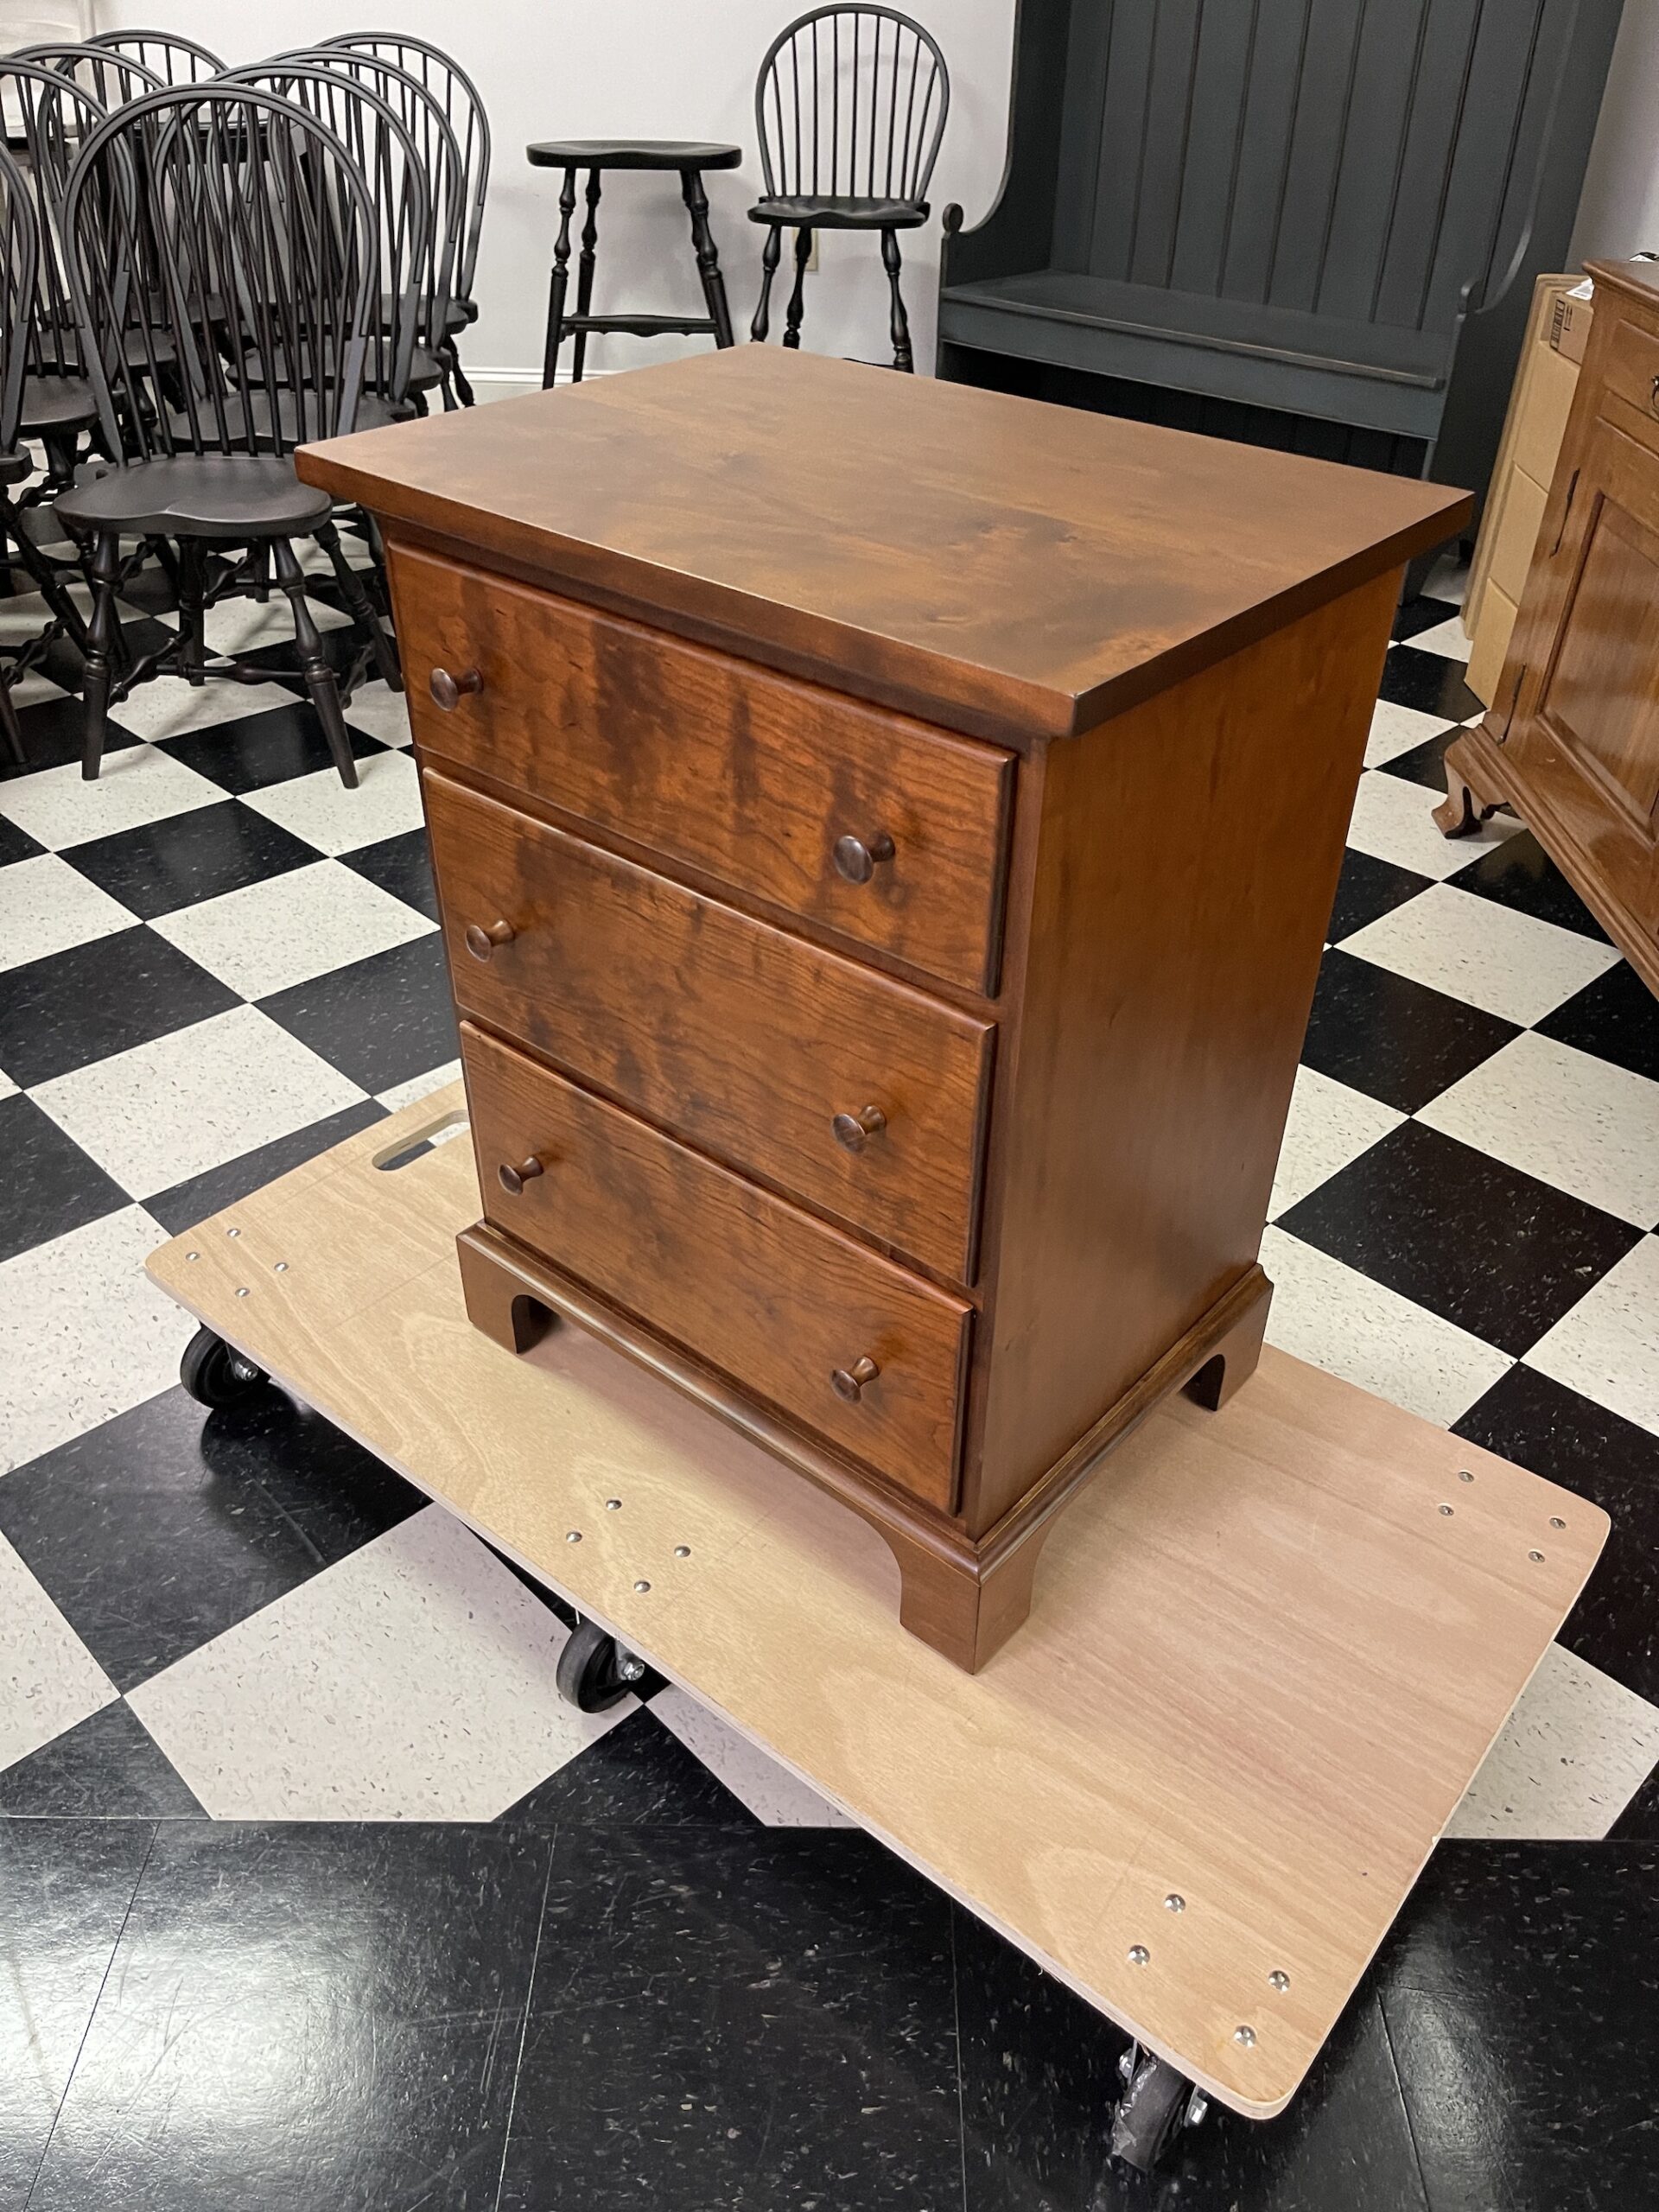 New Model - Shaker Style 3 Drawer Stand - Cherry Wood Image